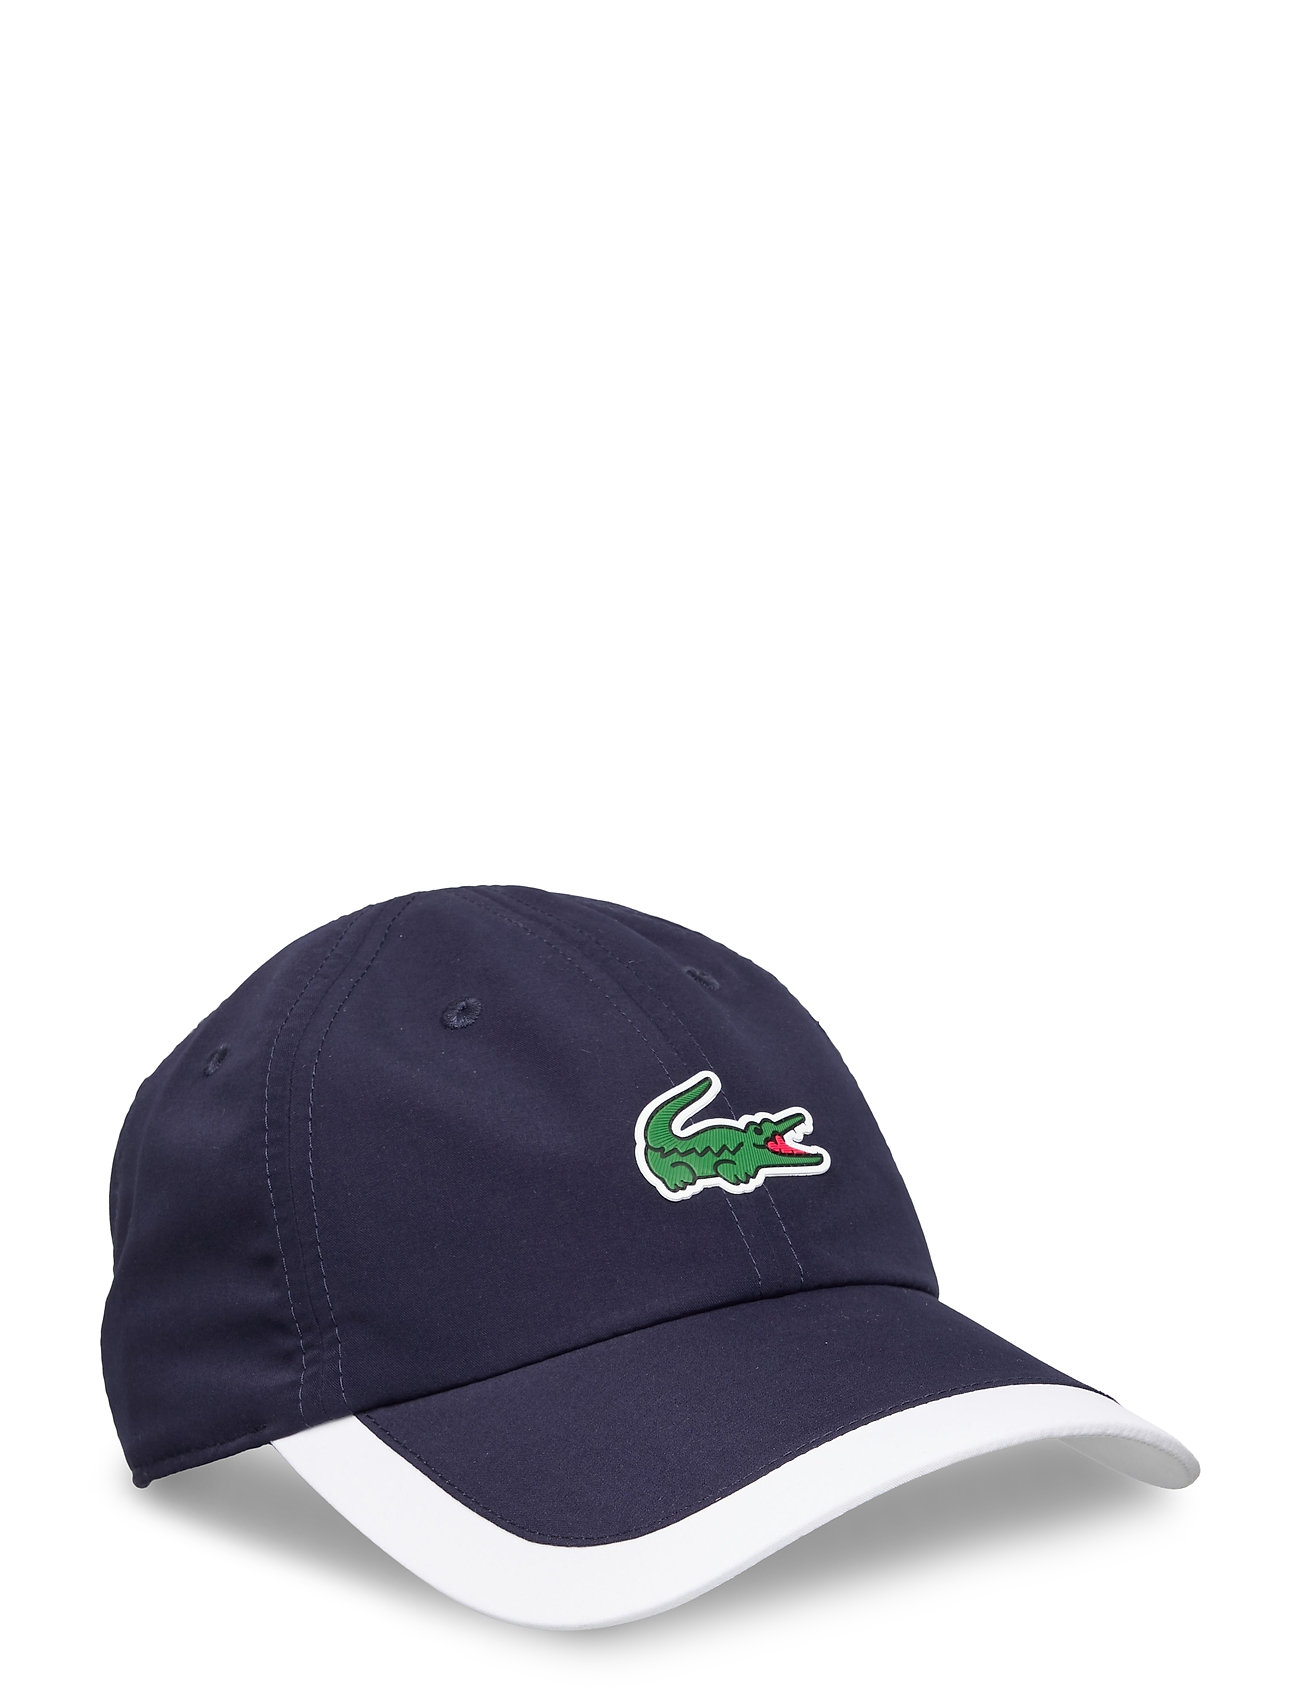 Lacoste Caps And Hats Boozt.com